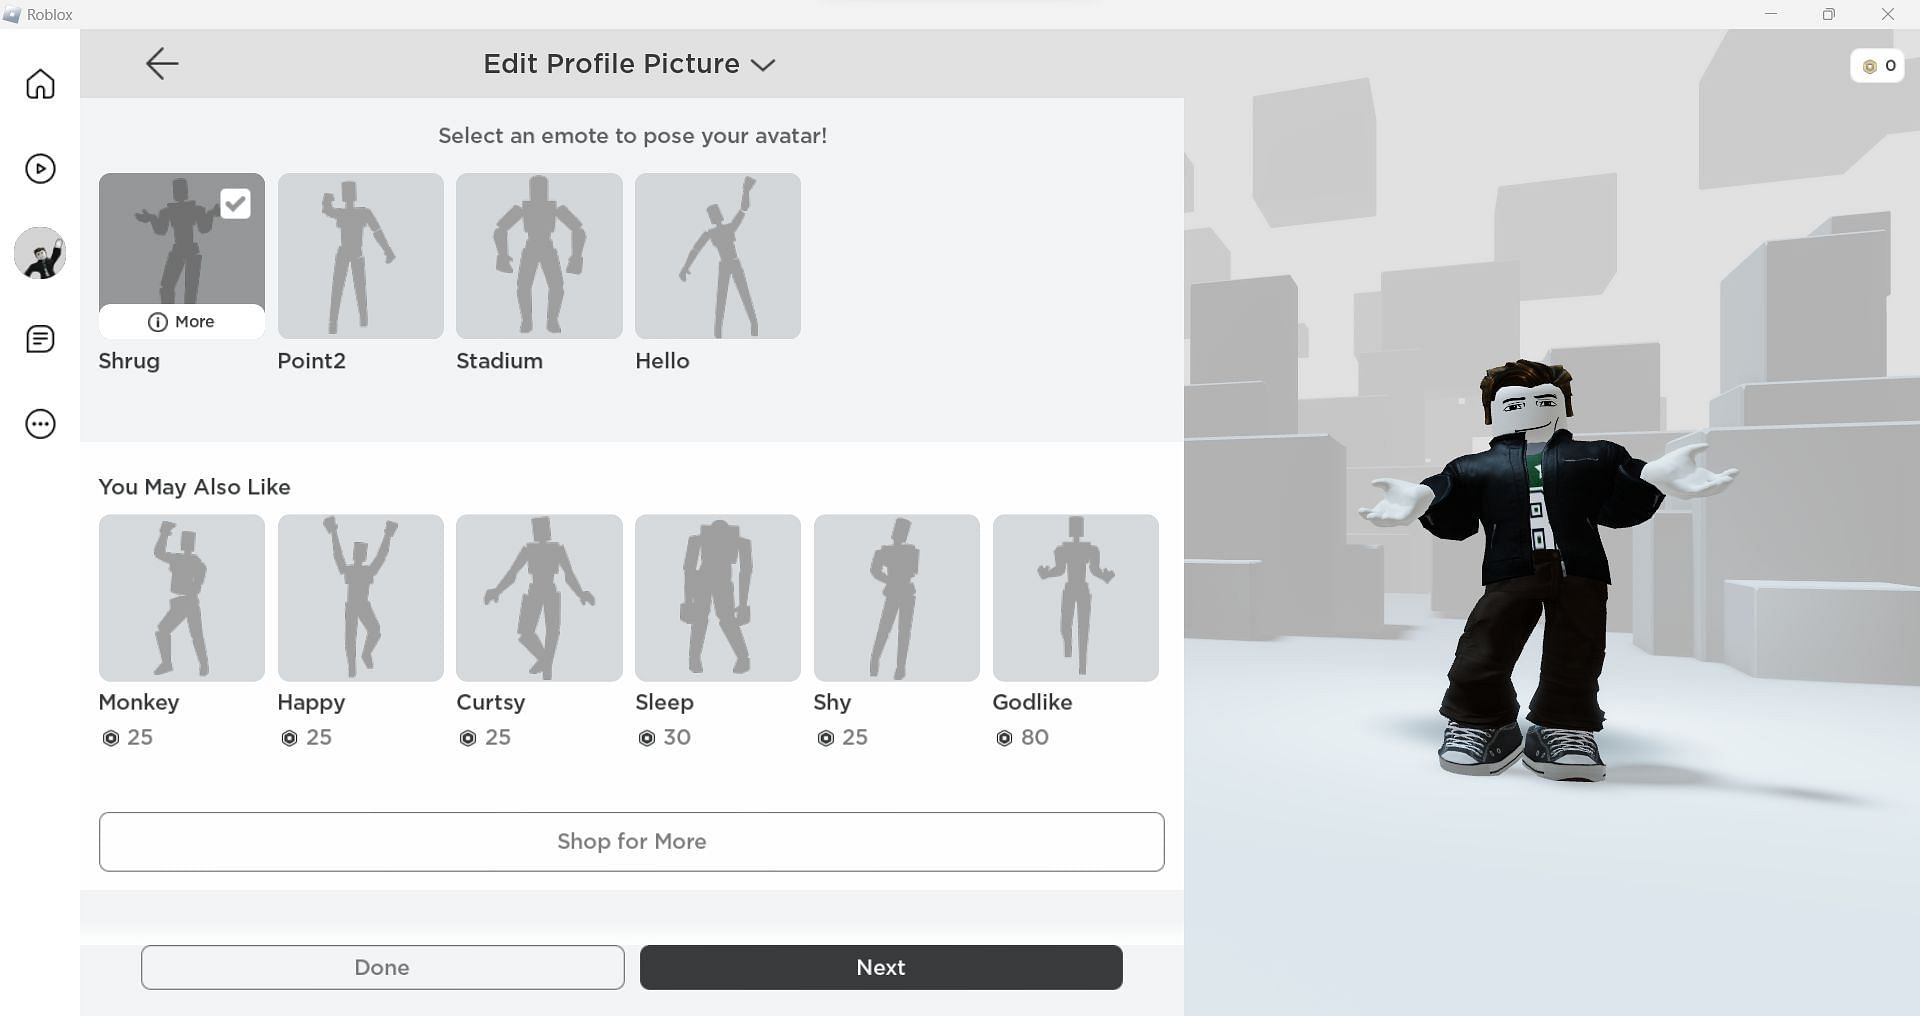 Best ways to Customize your Roblox Avatar